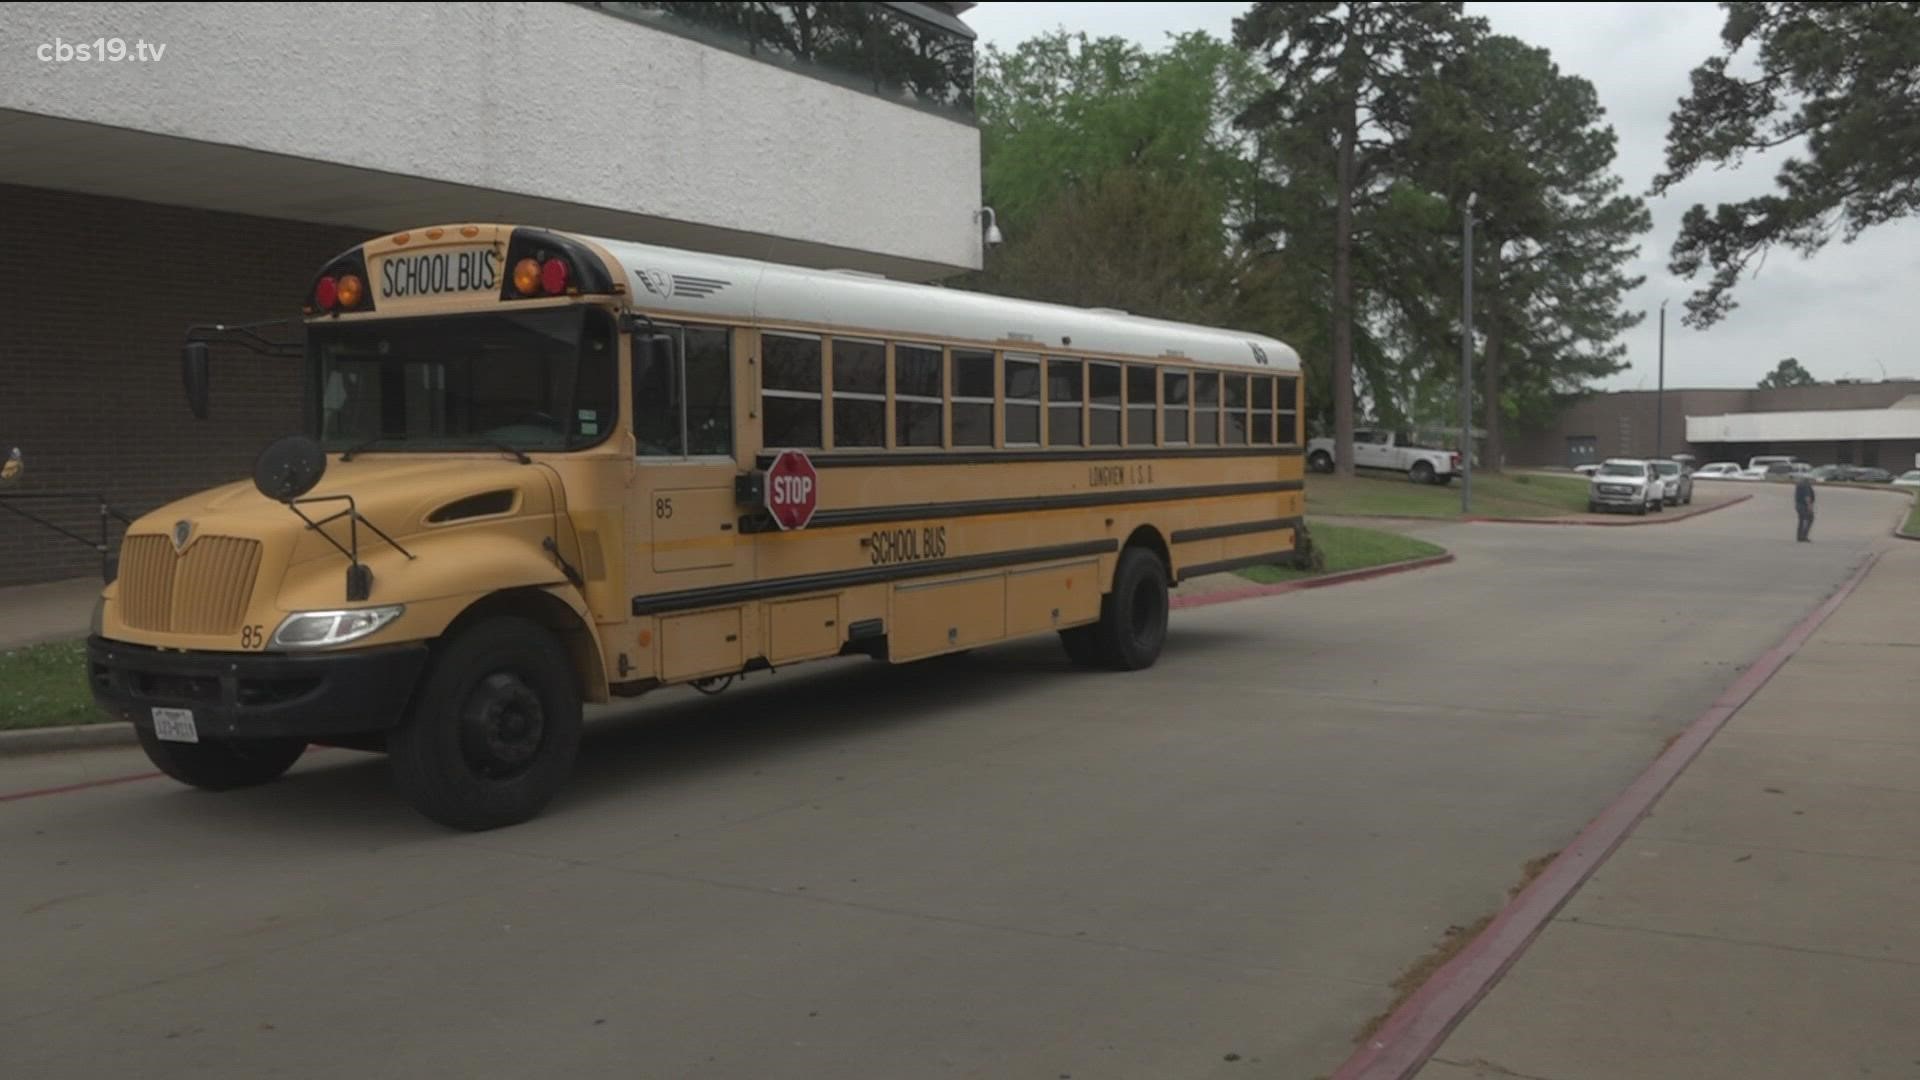 CBS19 breaks down each local school districts' bond to let voters know what the money will go toward if approved.